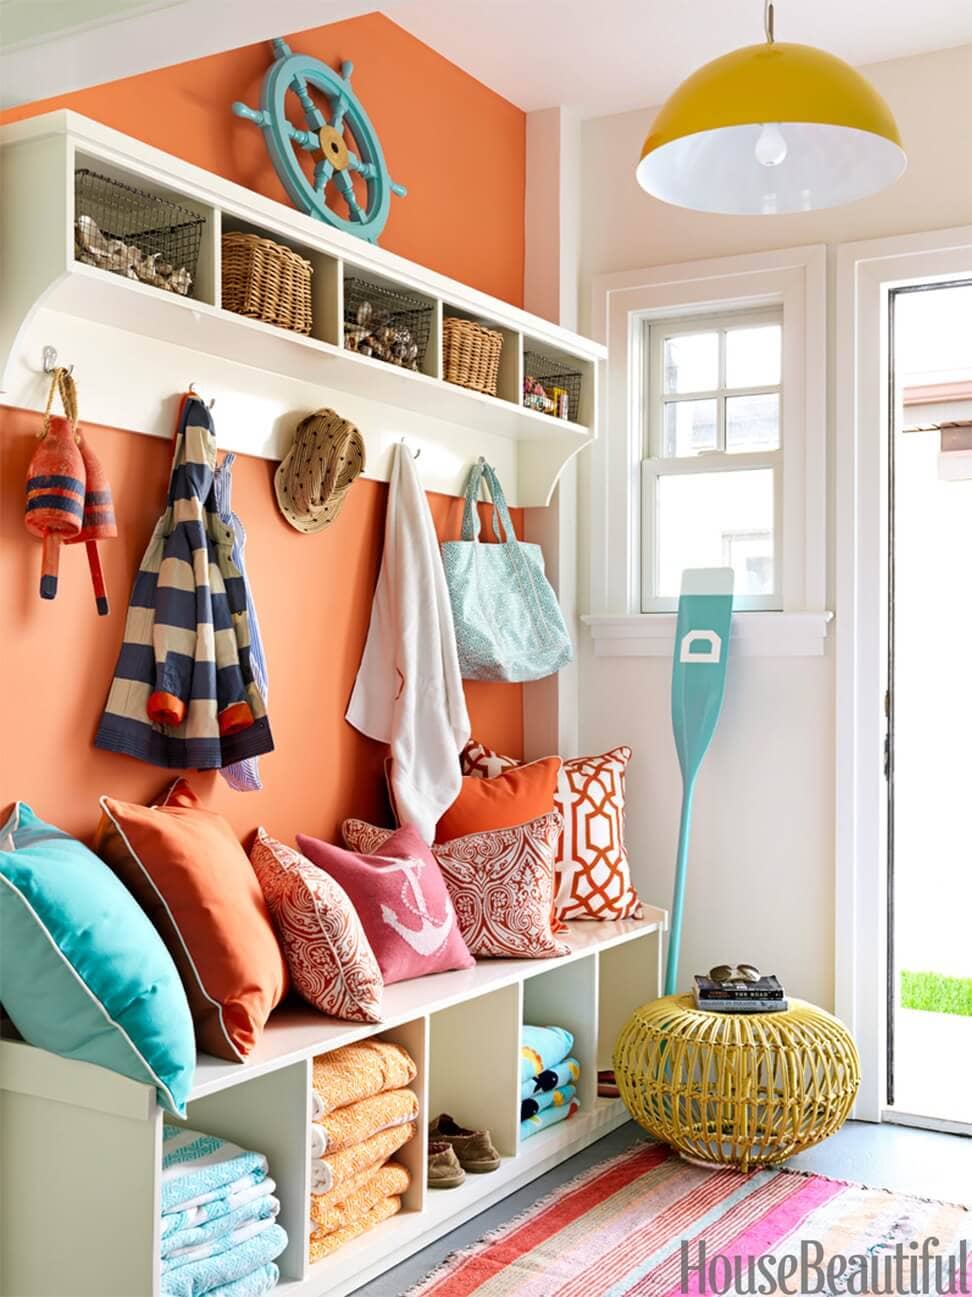 20 mudroom ideas to liven up your entryway - 75